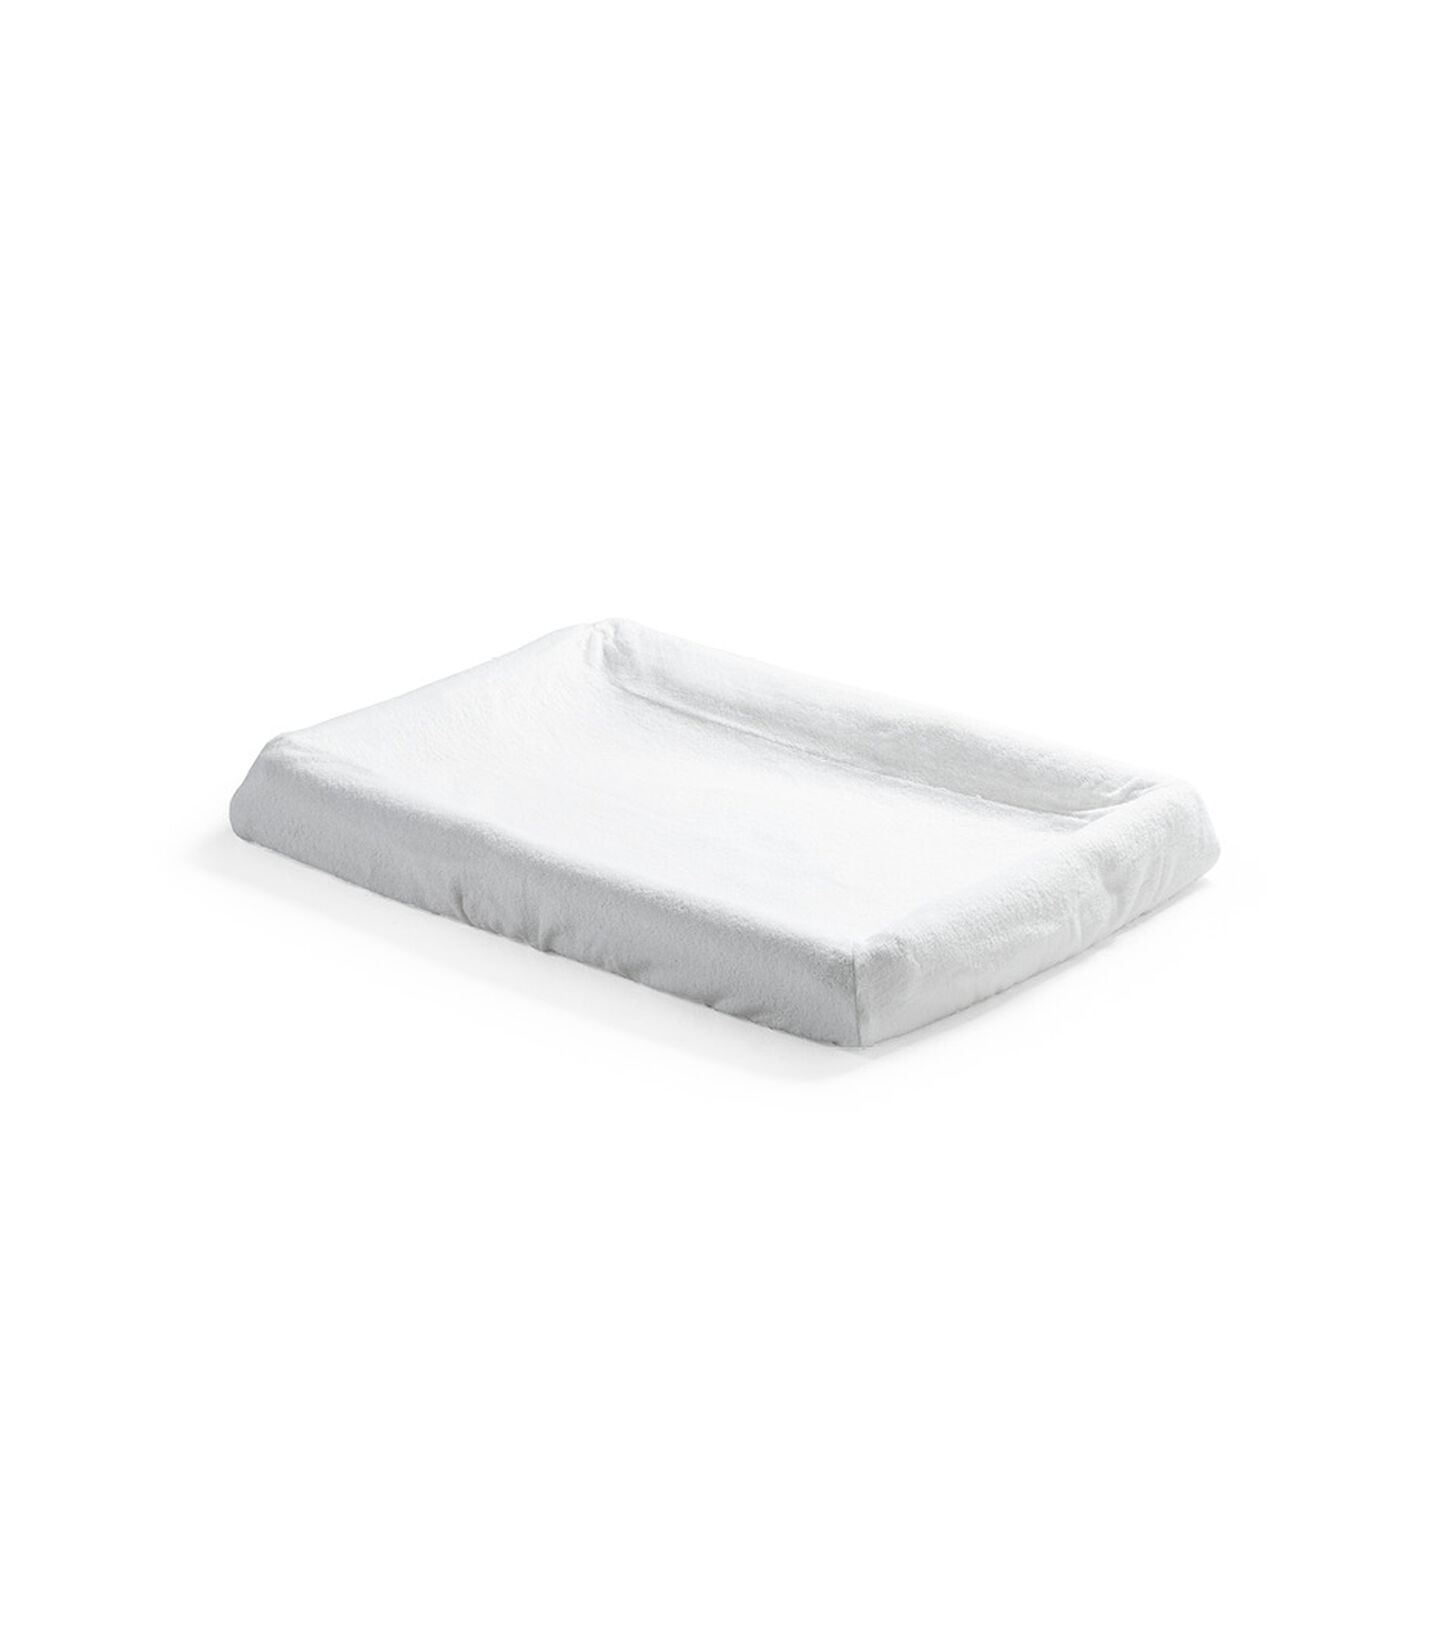 Stokke® Home™ Changer Mattress Cover 2pc White, , mainview view 1